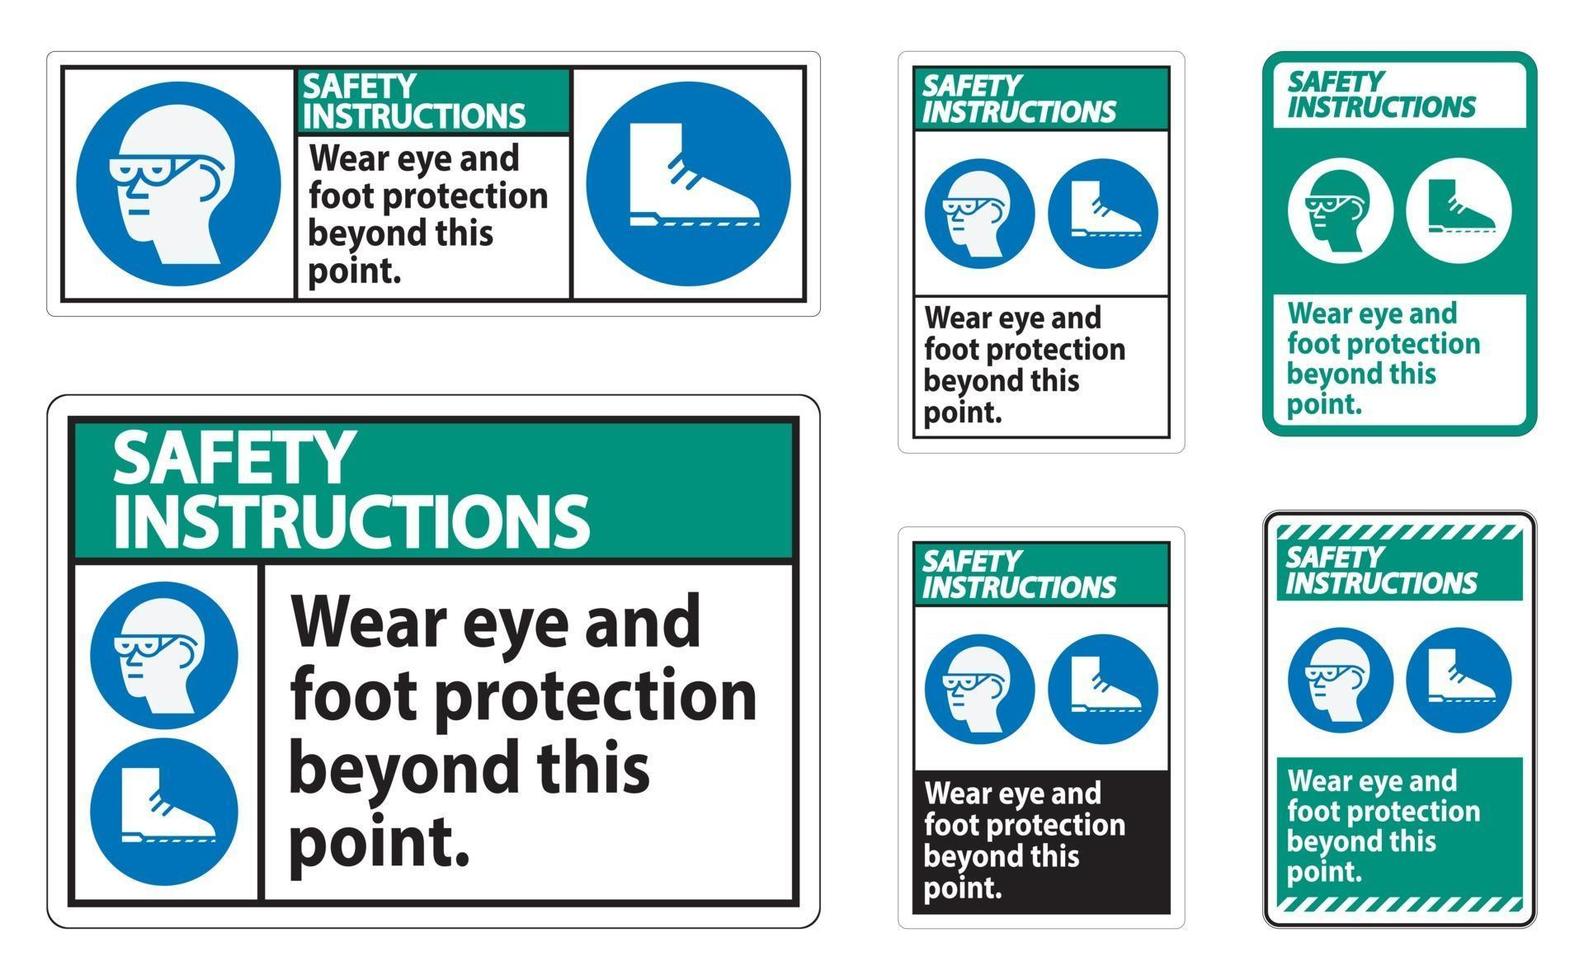 Safety Instructions Sign Wear Eye And Foot Protection Beyond This Point With PPE Symbols vector